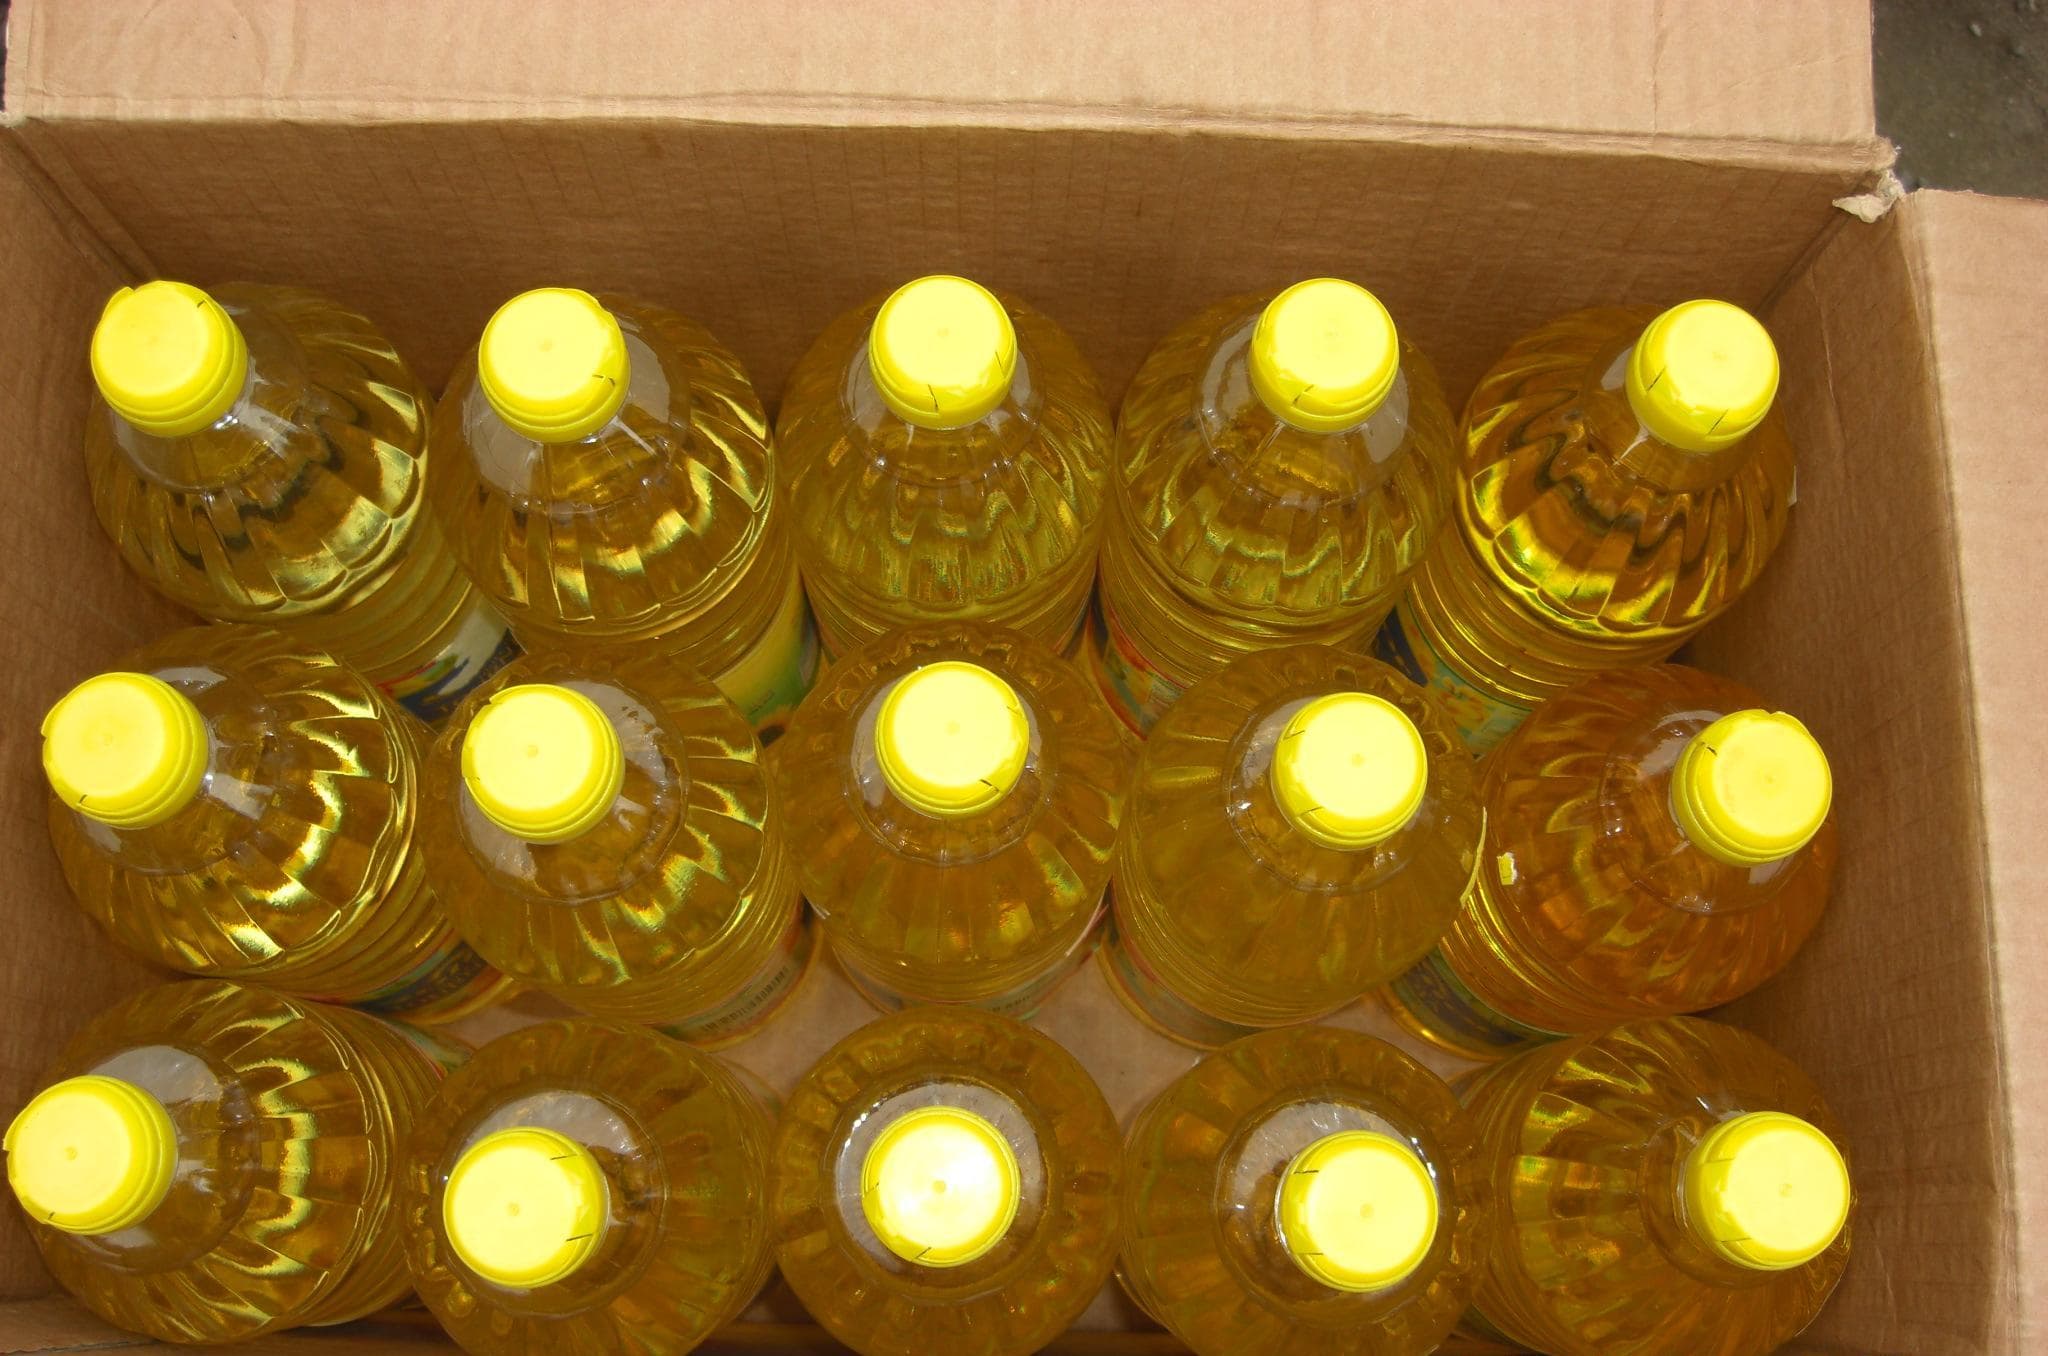 REFINED SOYBEAN OIL FOR SALE